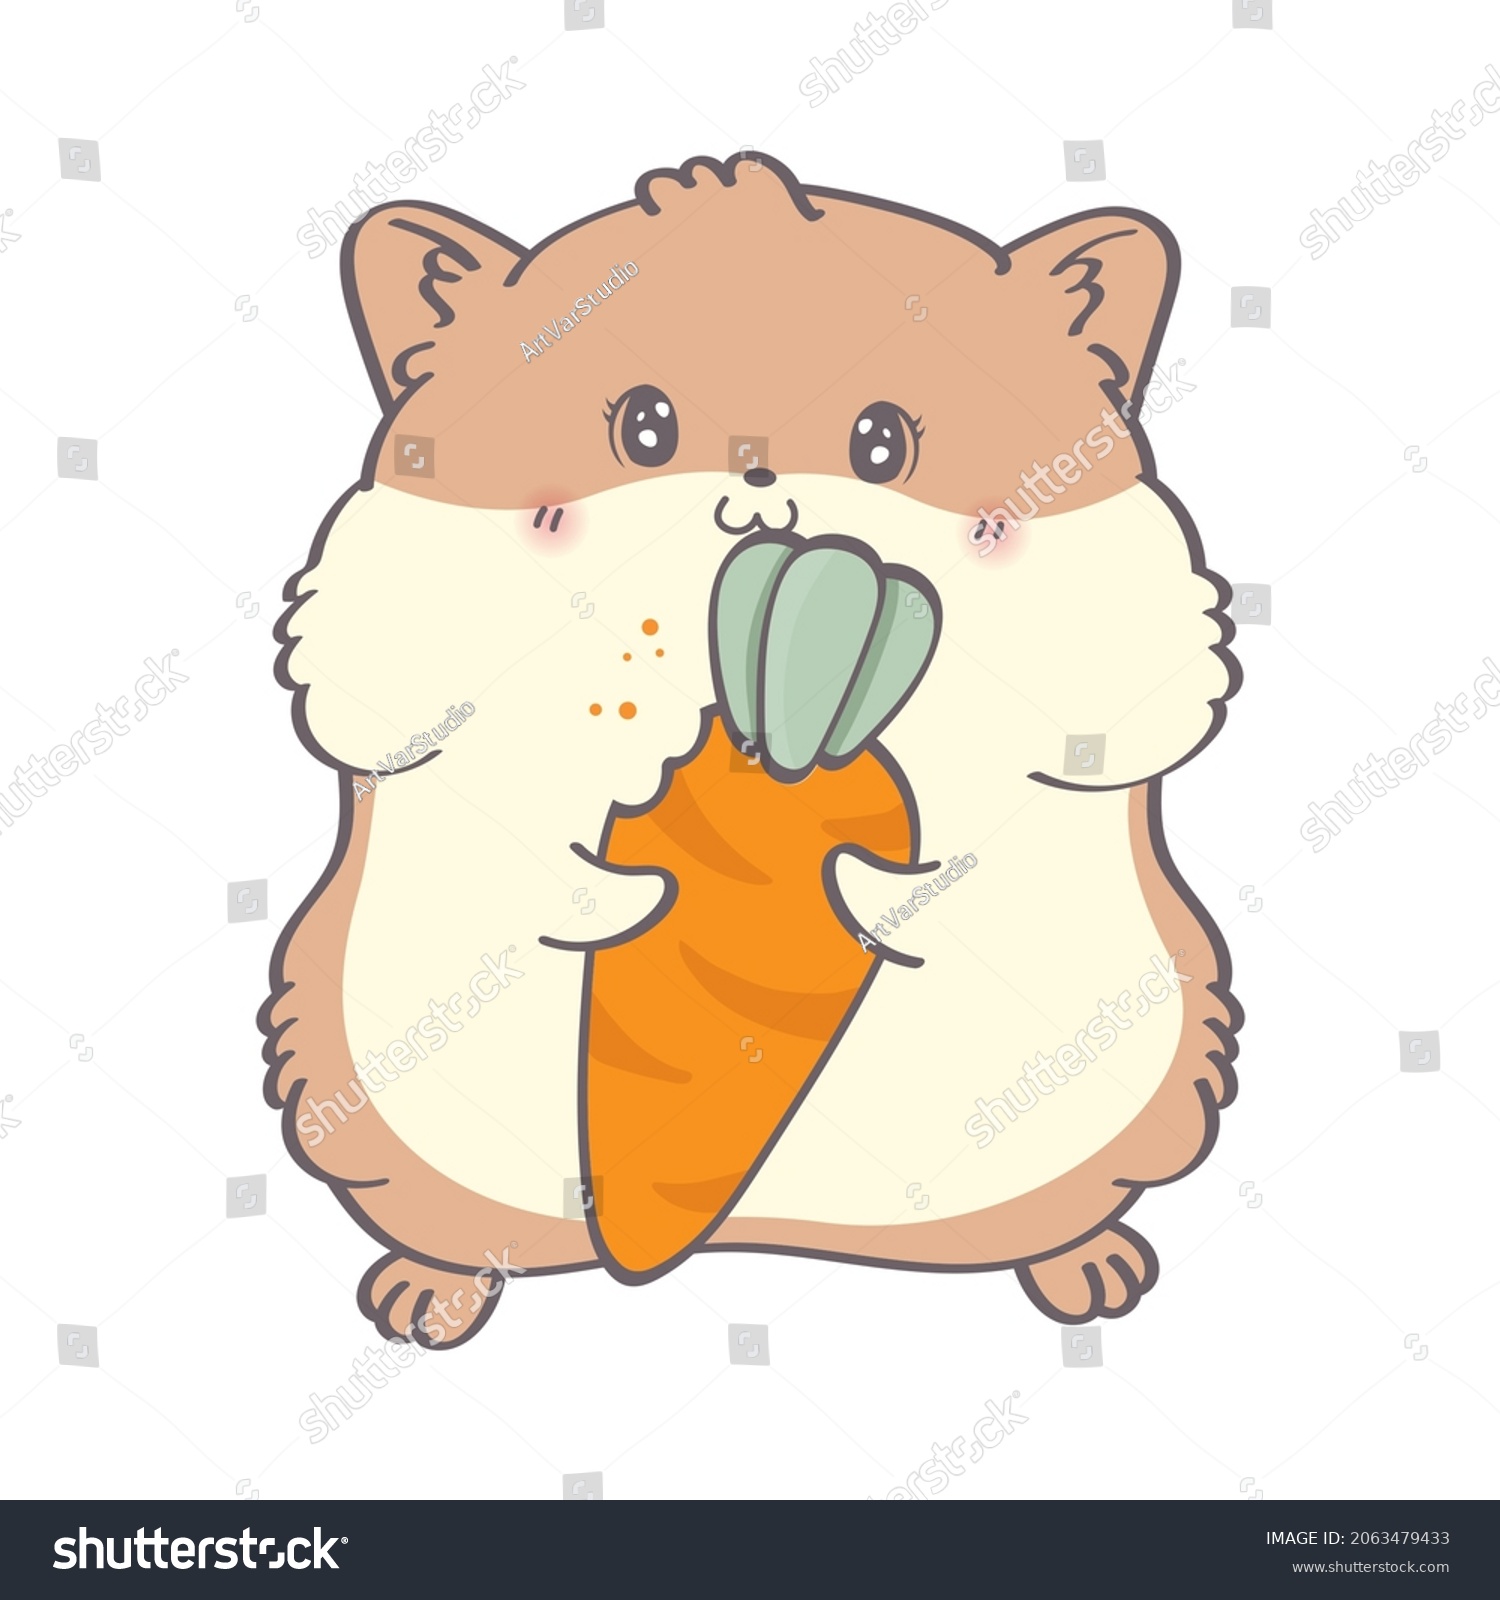 SVG of Drawing cute hamster cartoon. Hamster illustration. Surprised hamster eating orange carrot. Vector illustration of animal for nursery room decor, posters, greeting cards and party invitations. svg